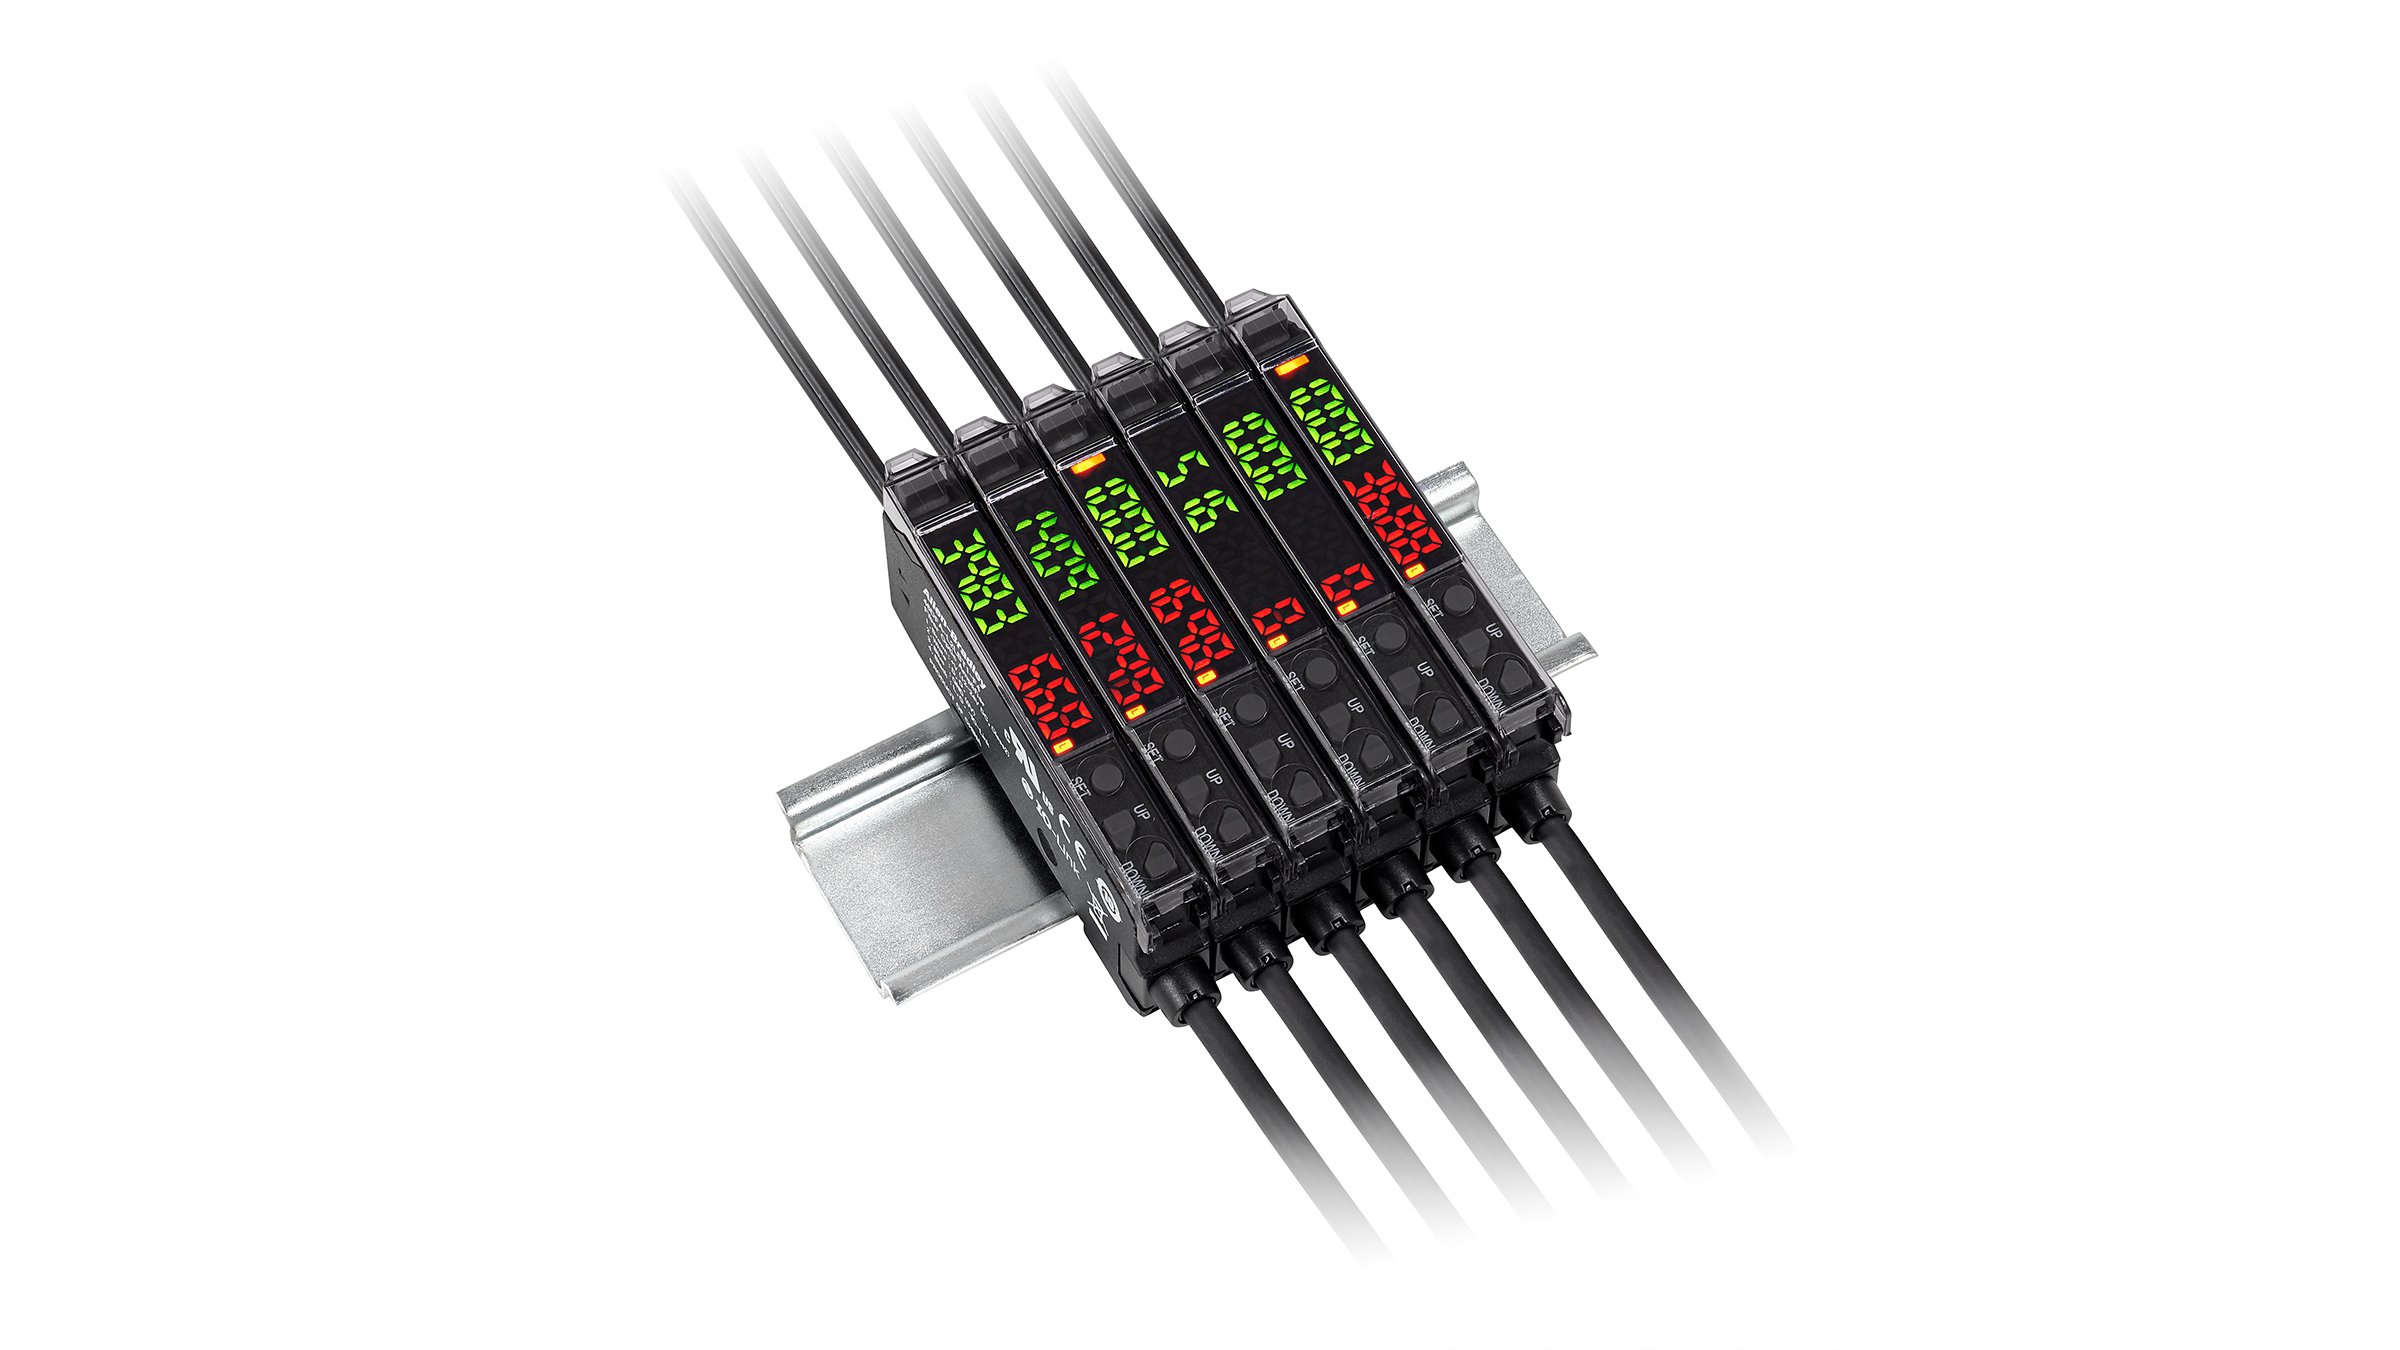 6 adjacent thin black, rectangular sensors with flush green and red indicators, cables on each end, mounted on a DIN rail